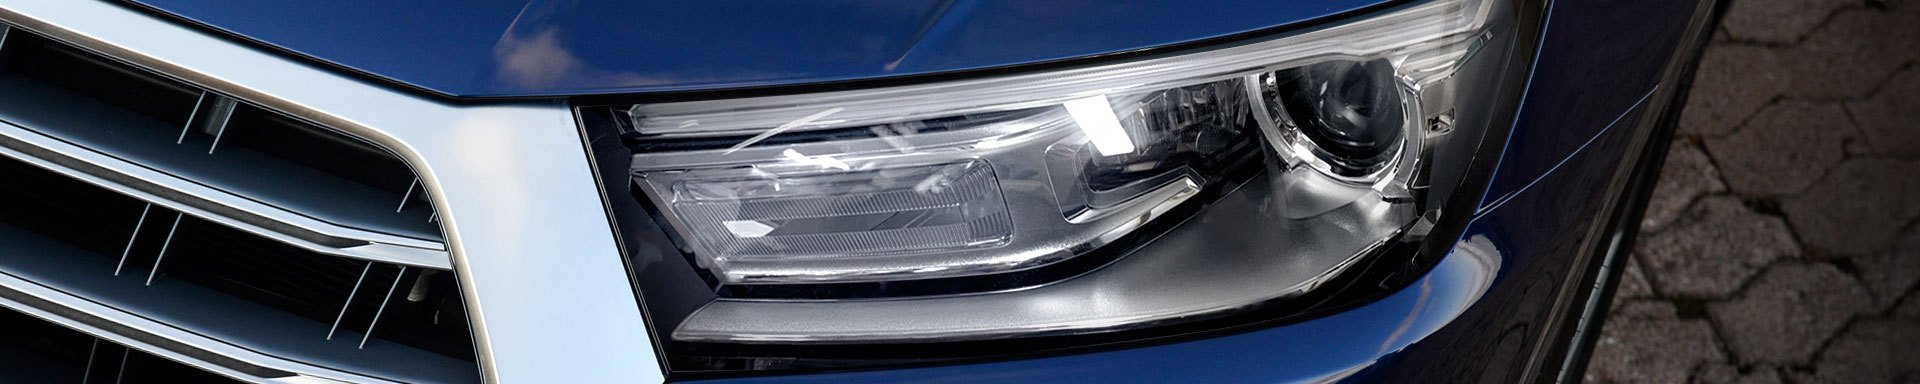 OE Style Replacement Headlights Are Now Available for Audi Q5